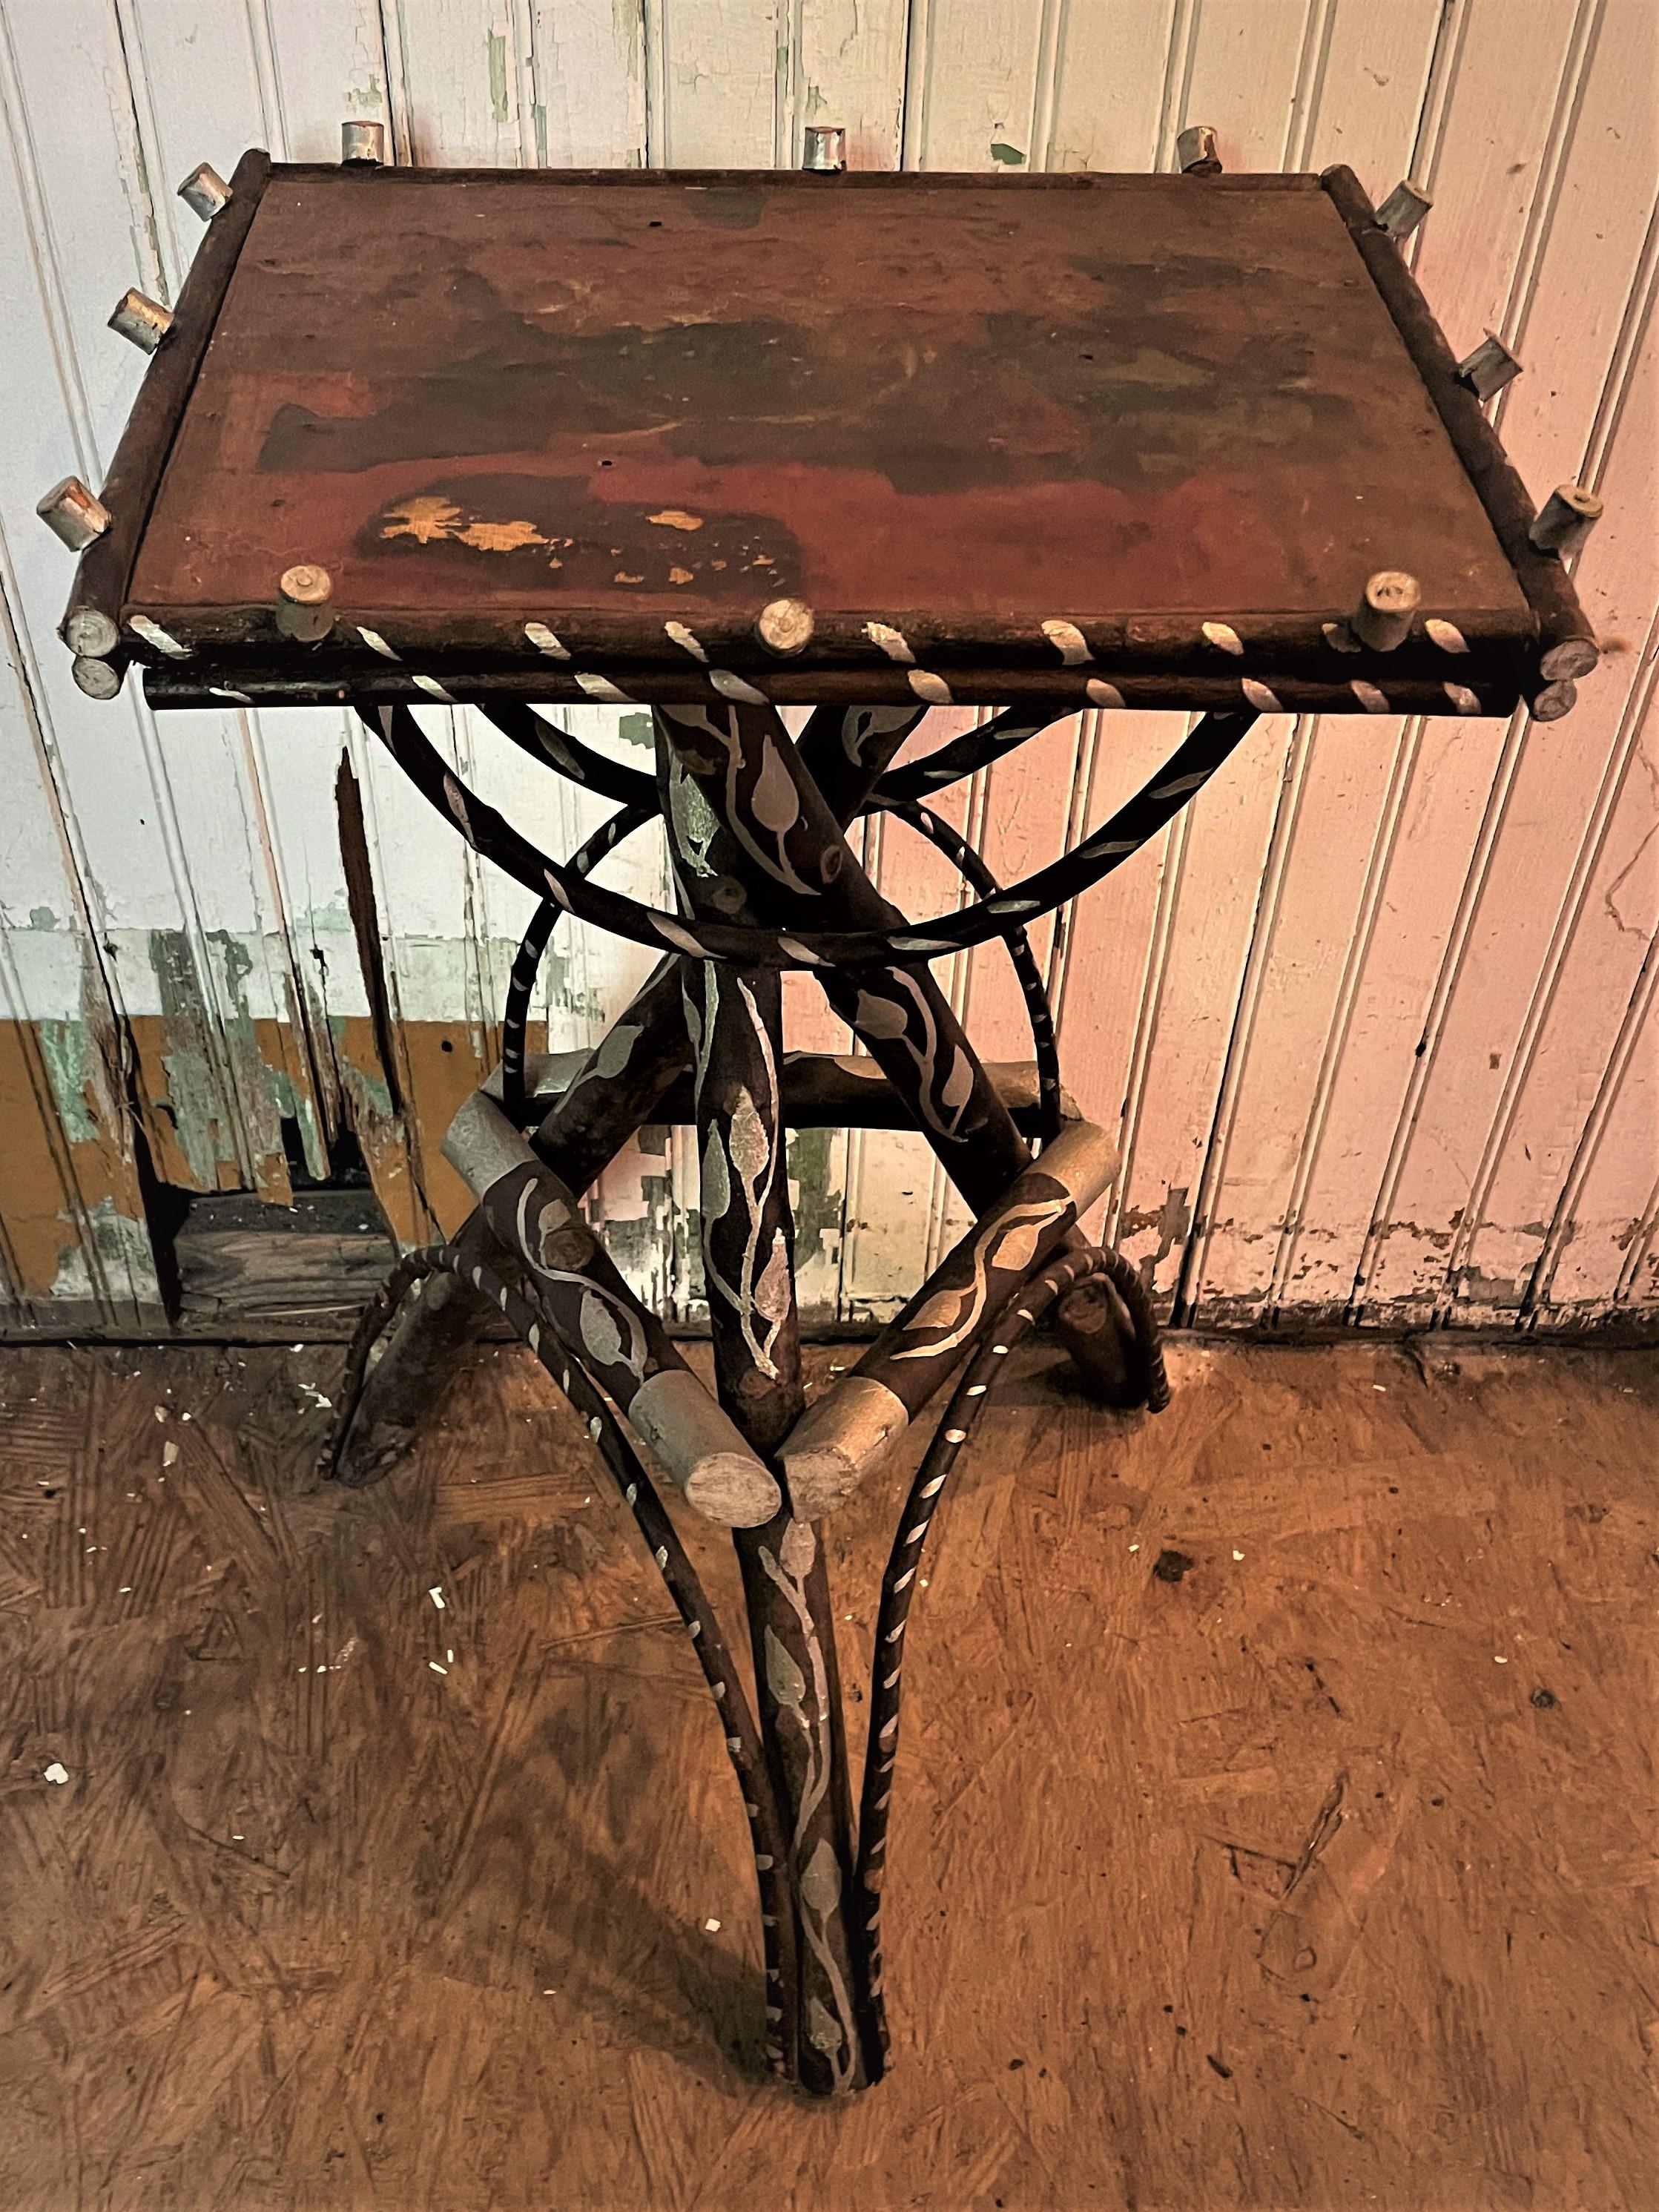 This is the sweetest Adirondack stand or side table with a dark finish decorated with silver paint and an aged brick red finish on the top. The base has a vine and end caps on all the wood and cross hatching on the bent twigs painted in silver